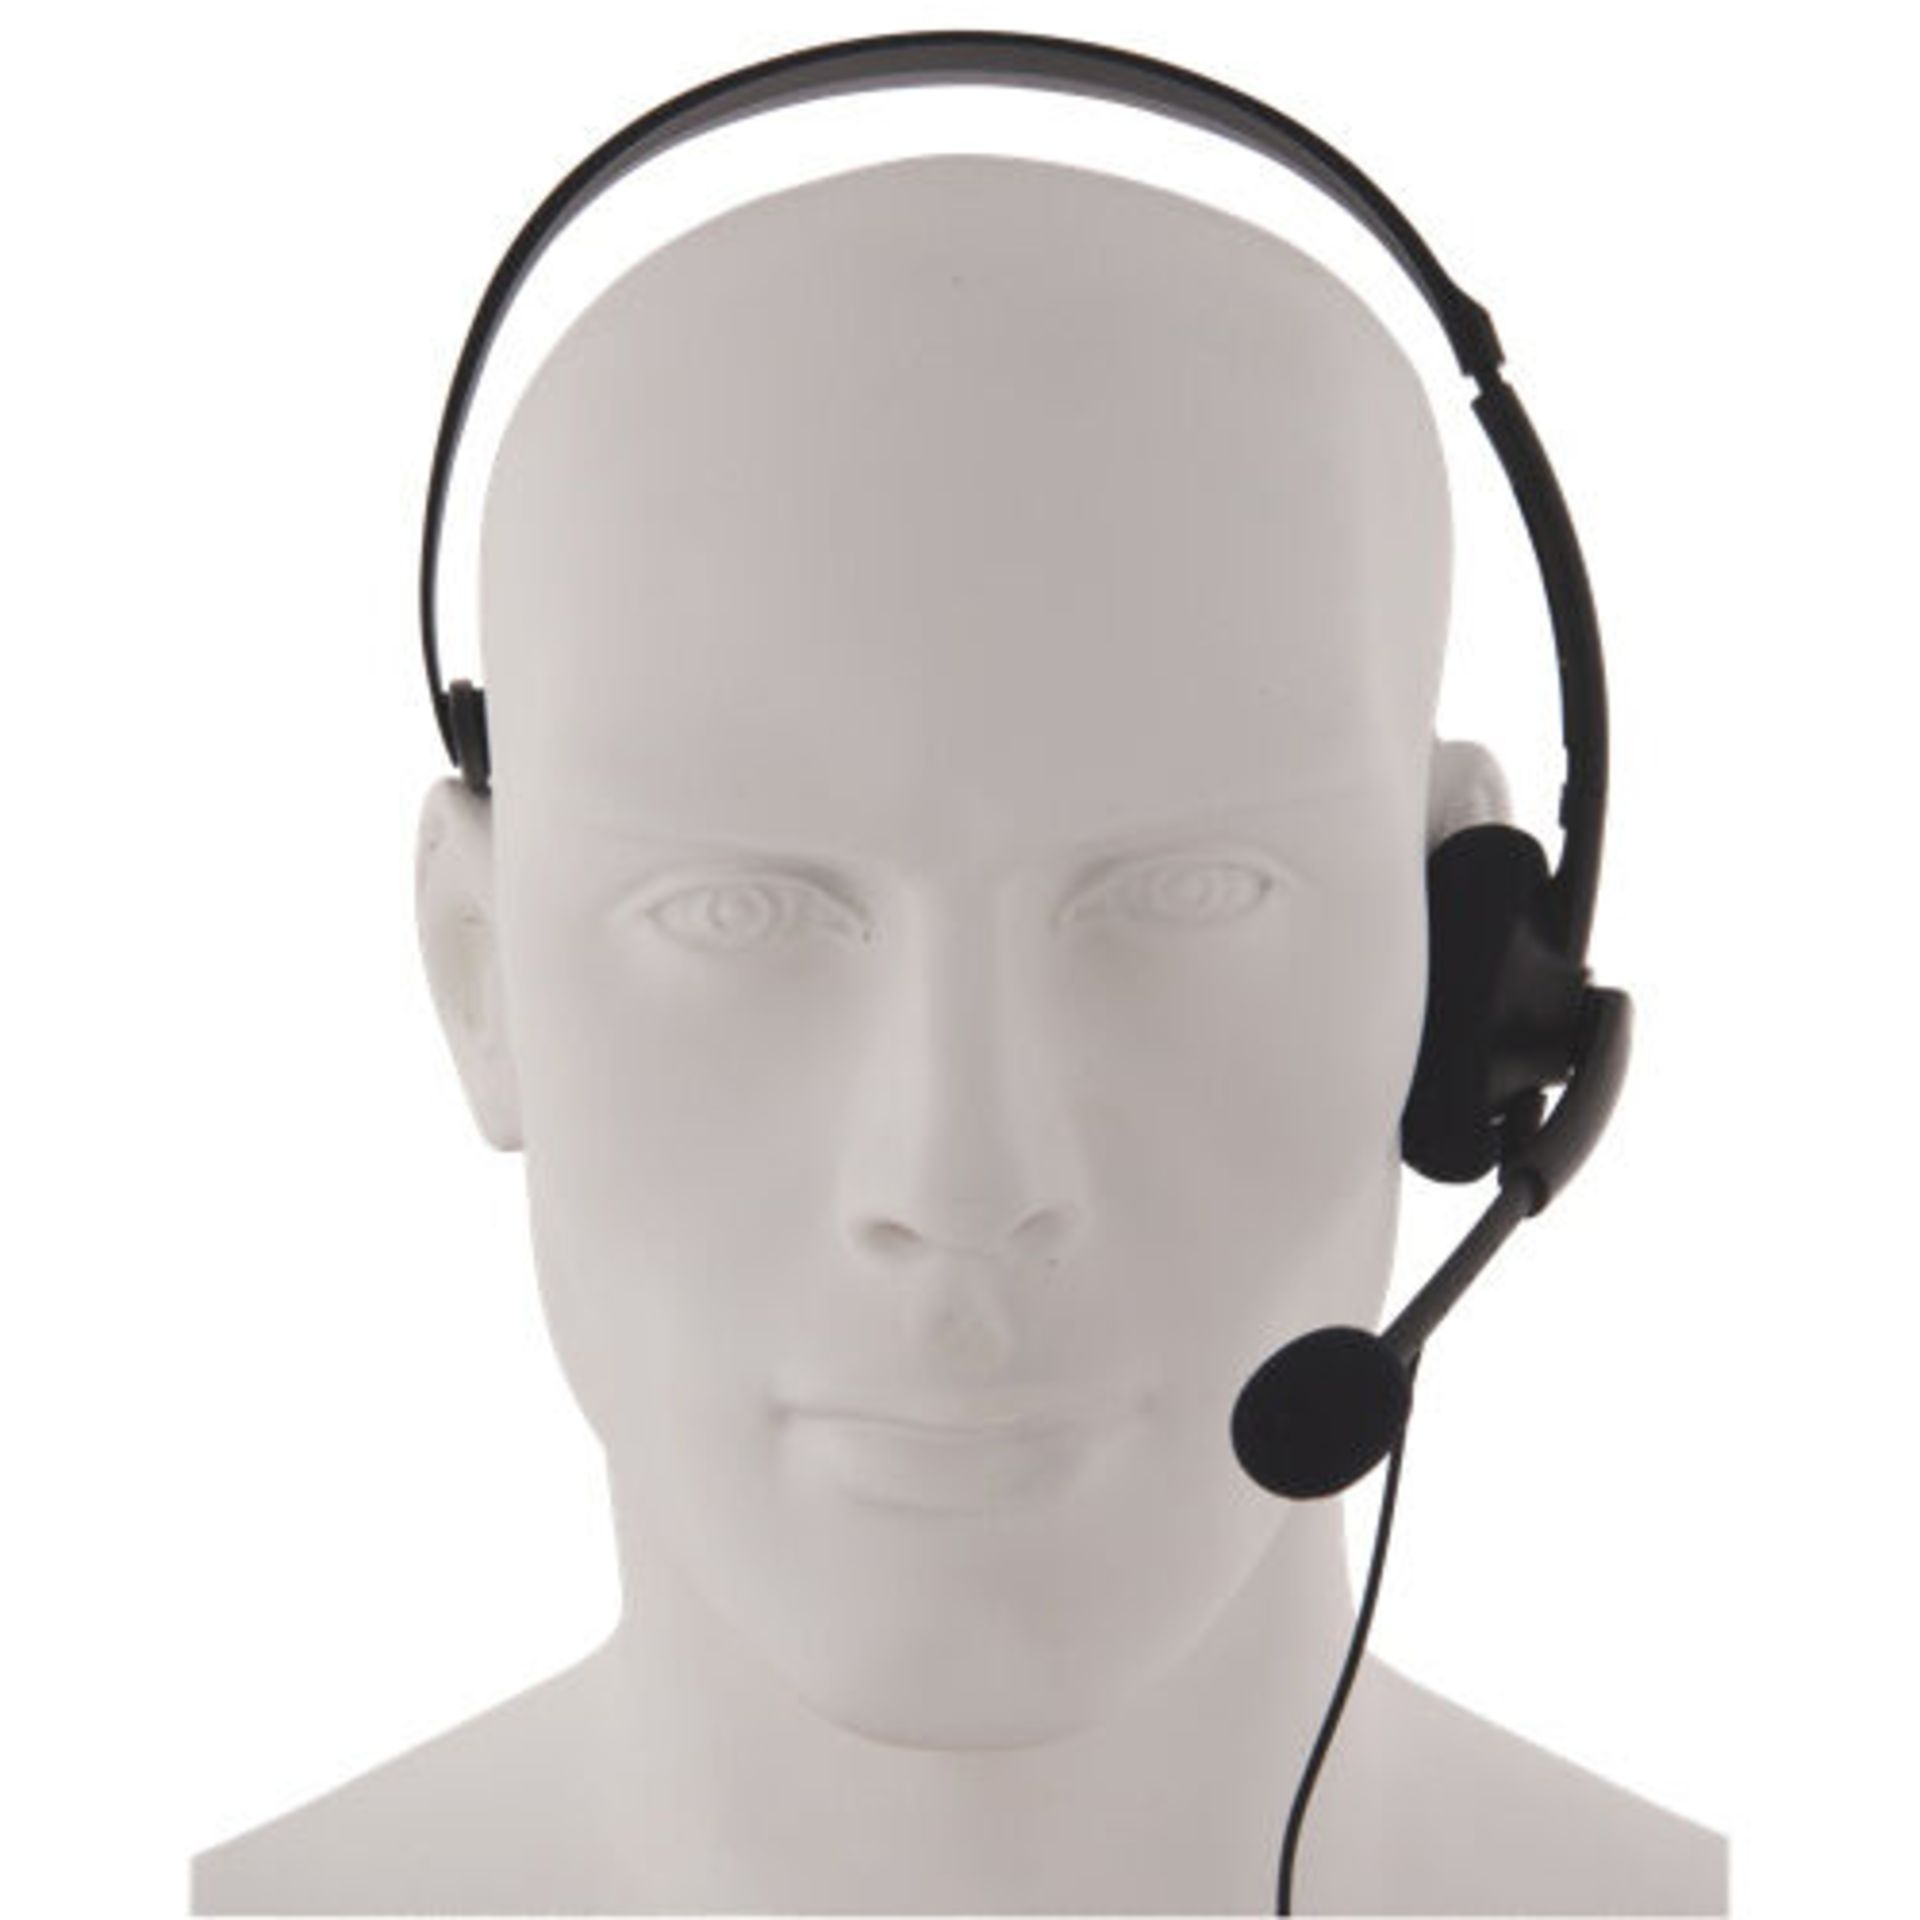 JOBLOT 100 X NEW OFFICIAL XBOX LIVE ONLINE CHAT HEADSET WITH MIC GAMING HEADPHONES 2.5MM AUX - Image 3 of 7